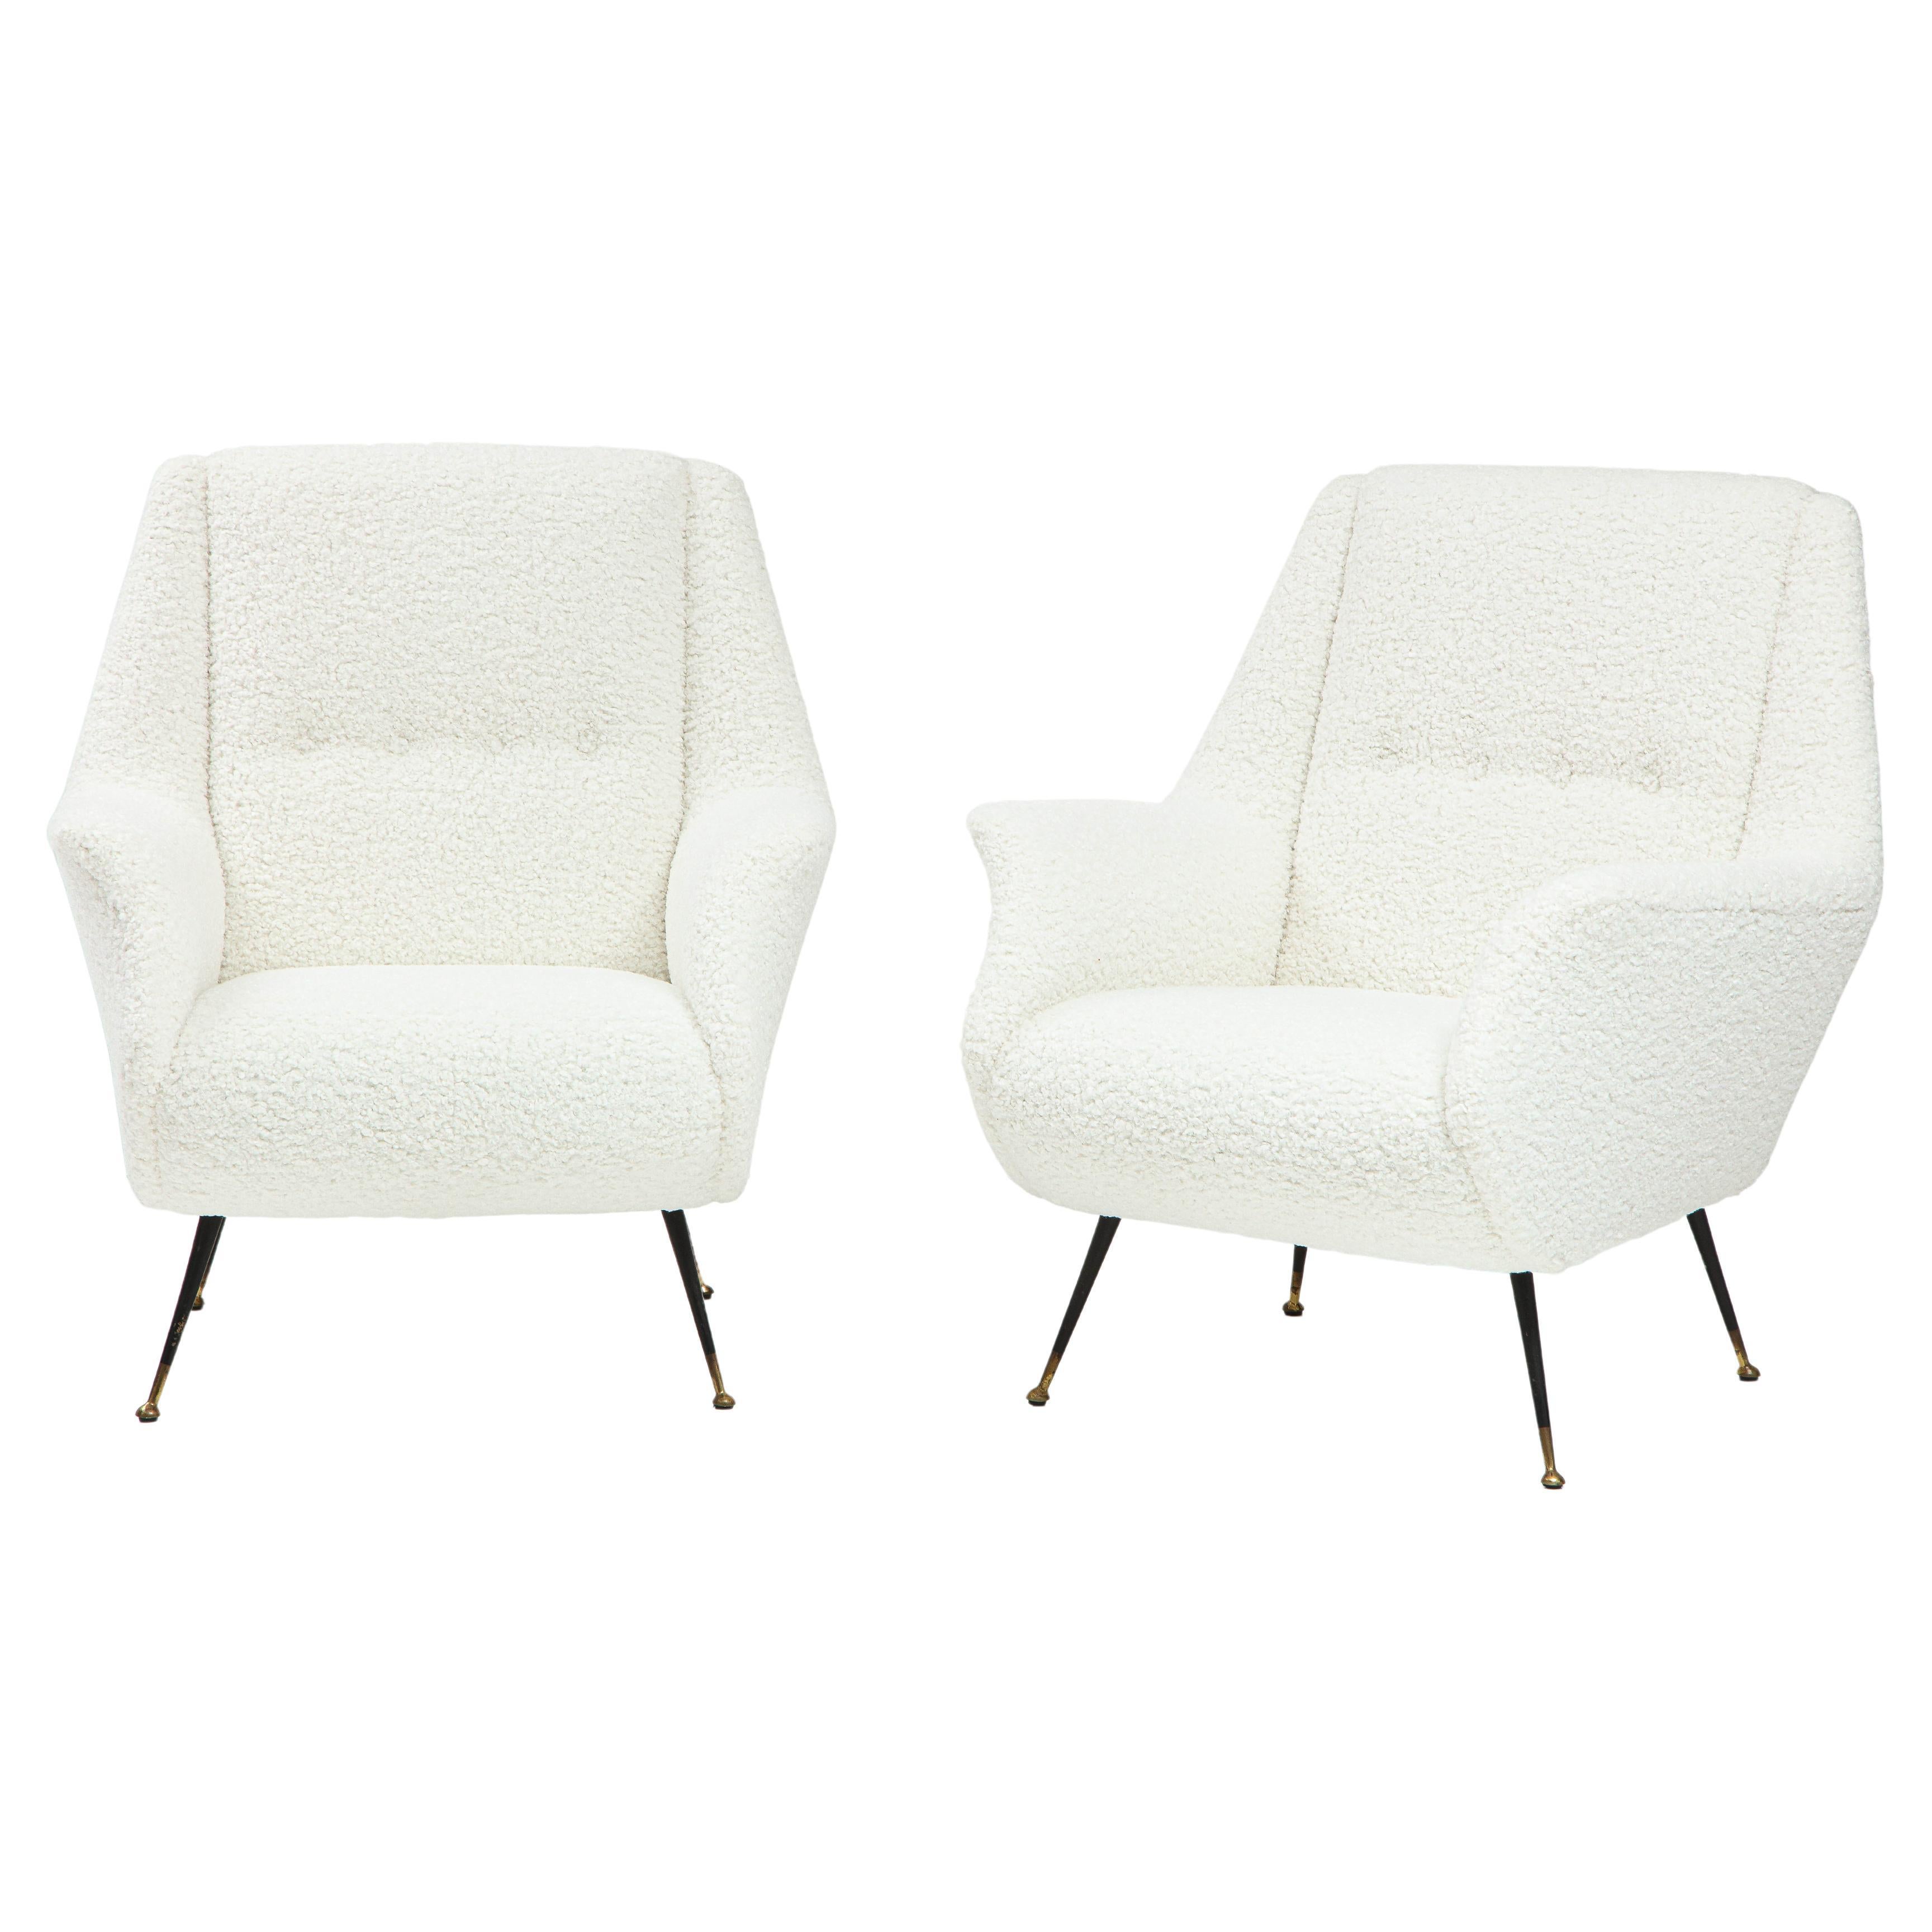 Pair of Northern Italian sculptural armchairs, the arms elegantly splayed, the whole newly upholstered in a creamy white faux shearling, with chic black metal and brass tapered legs. 
Northern Italian, circa 1960
Size: 35